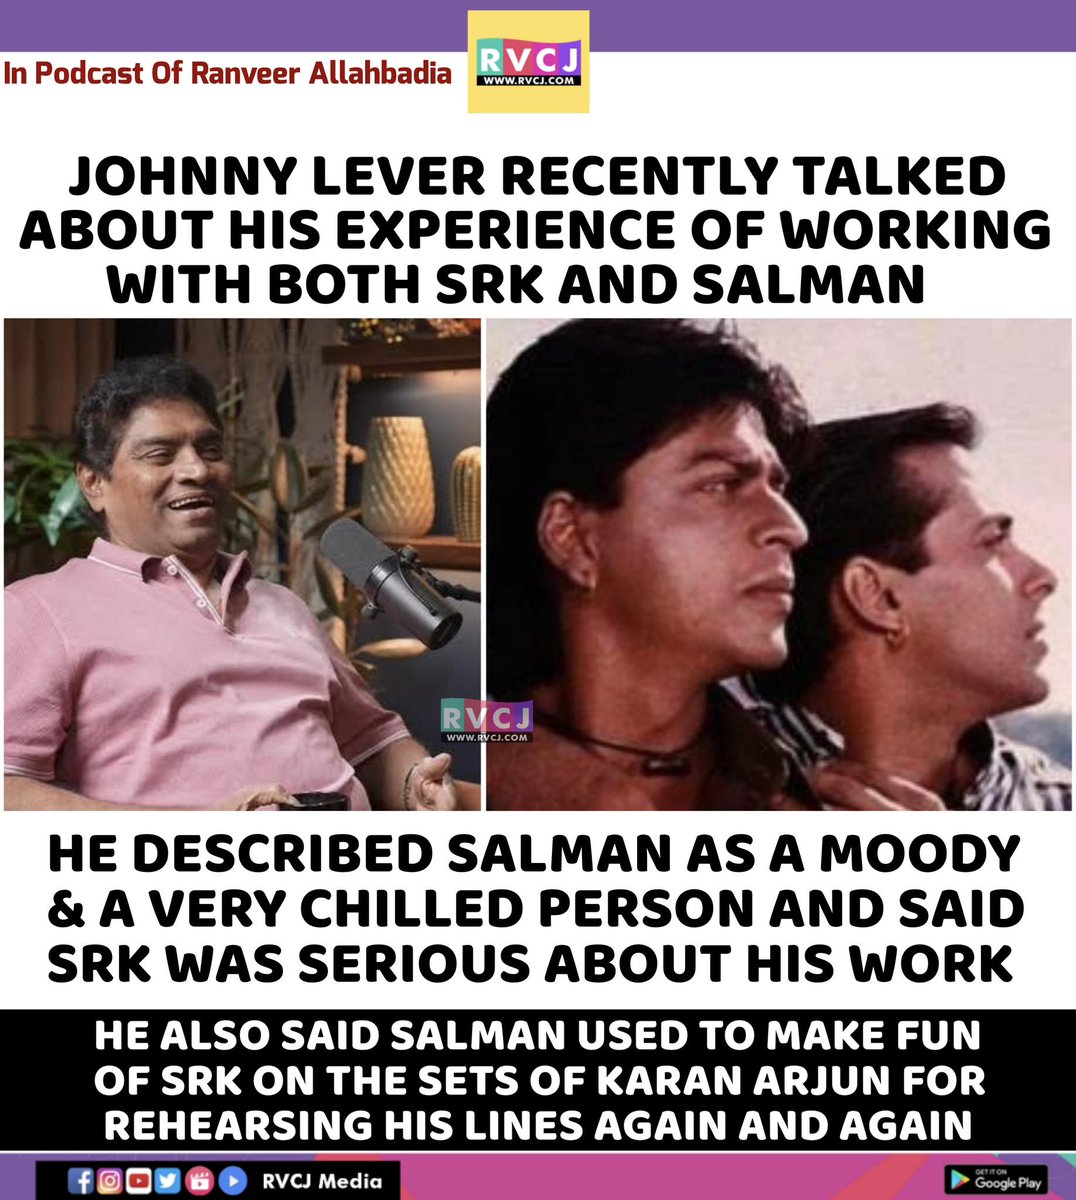 Johnny Lever about his working experience with SRK and Salman!

#johnnylever #shahrukhkhan #salmankhan #karanarjun